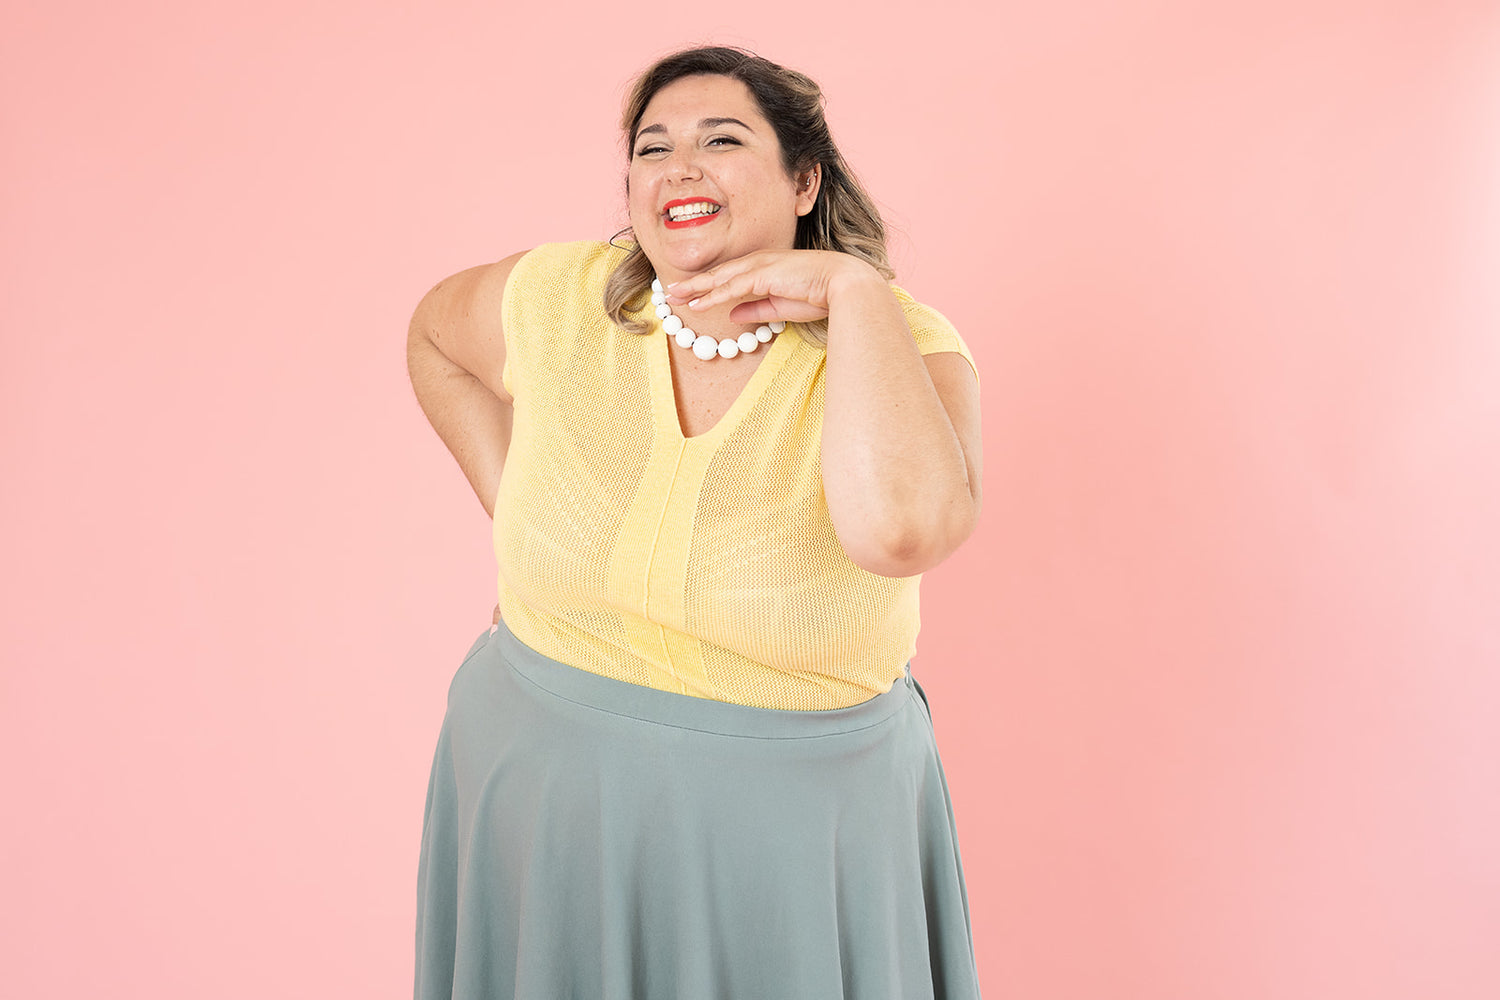 A plus-size white woman is smiling and posing for the camera; she is wearing a light yellow shirt, white beaded necklace and blue skirt. 